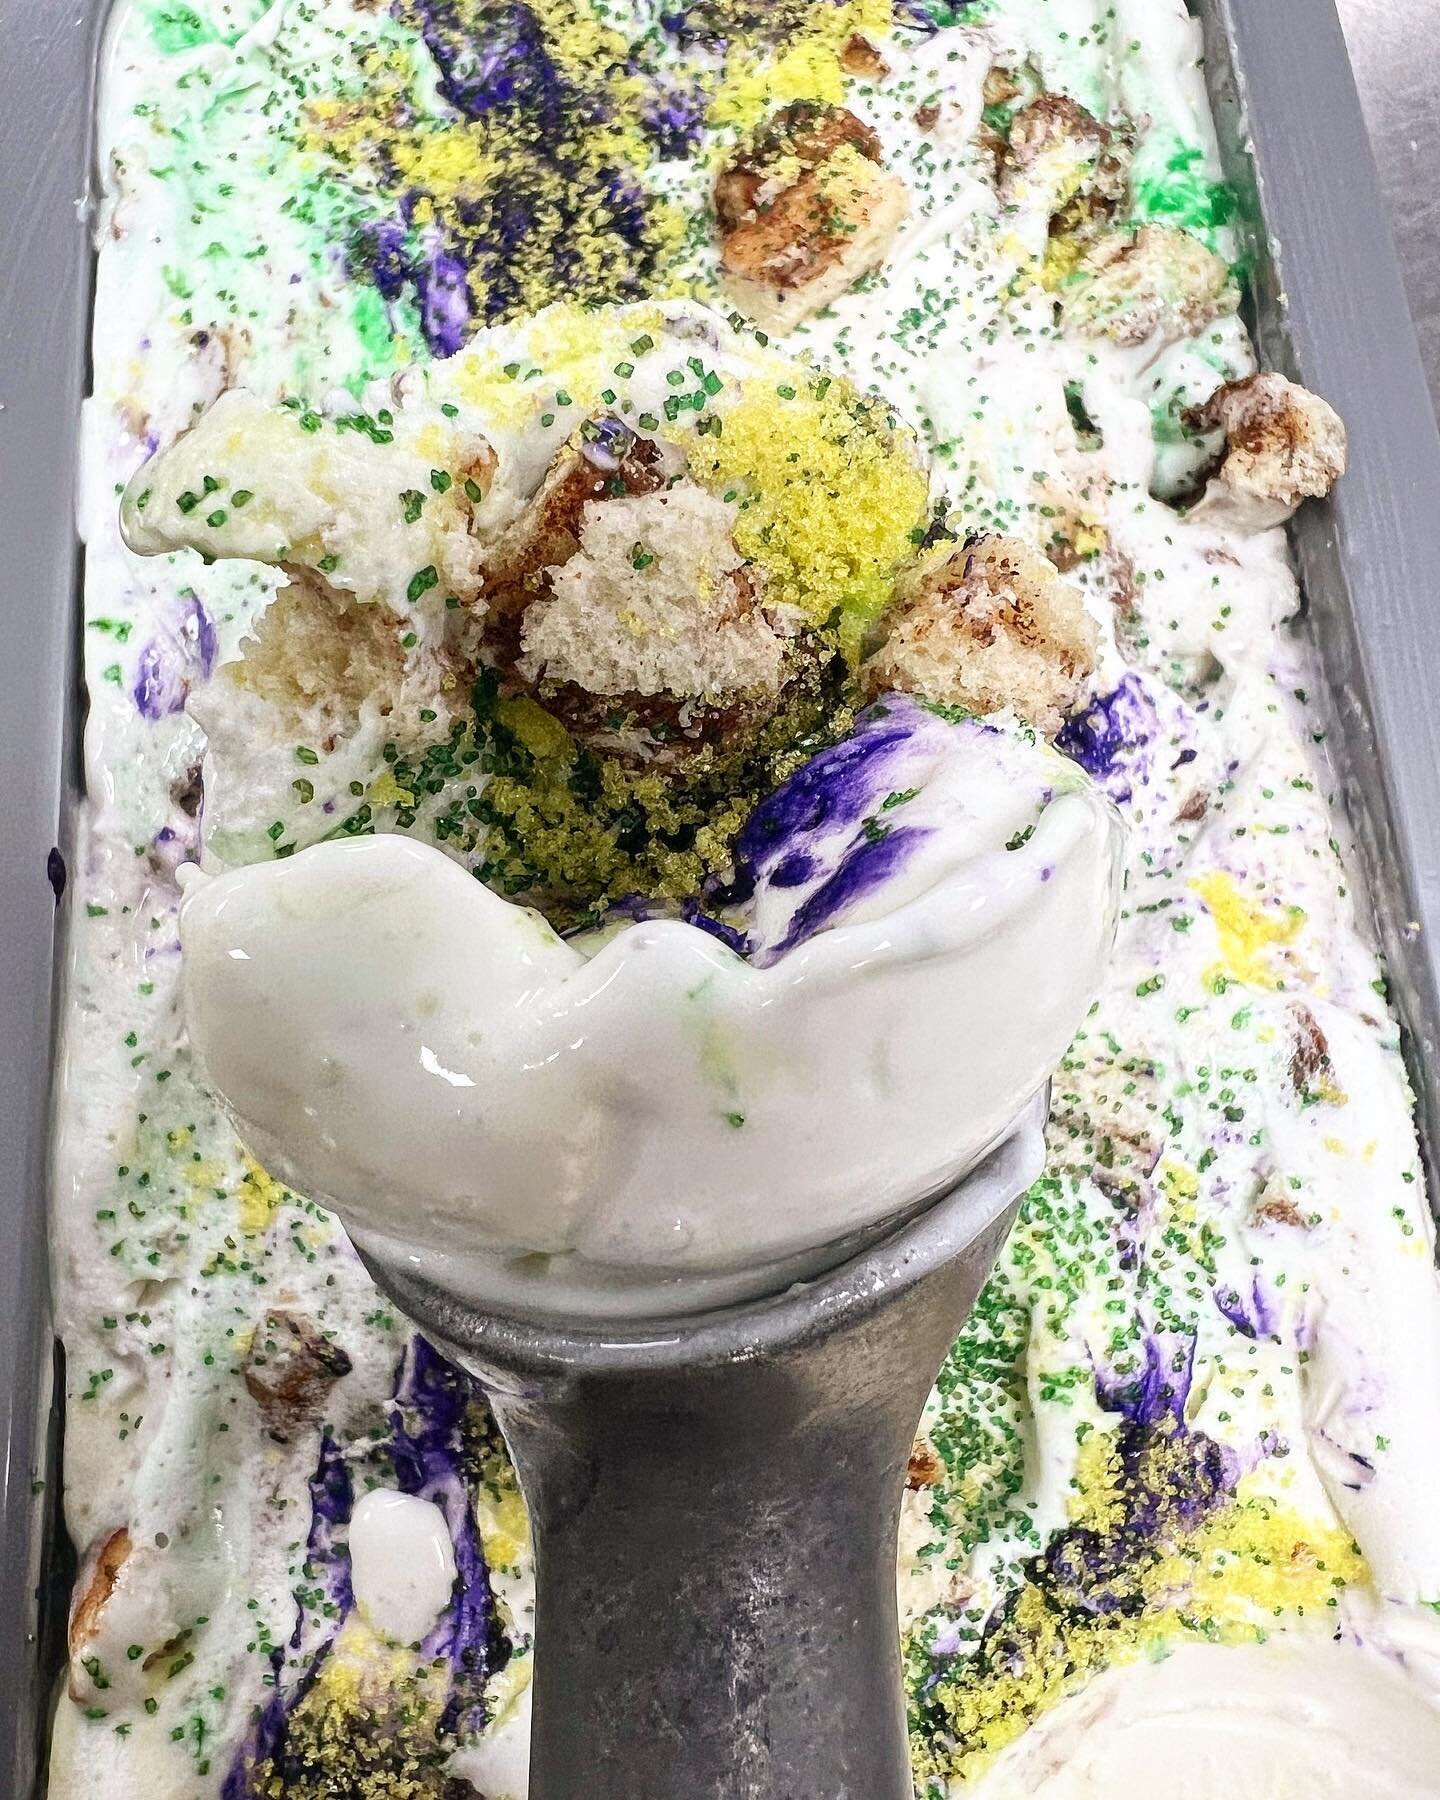 It&rsquo;s never too early for KING CAKE 👑
Gelato 🍨💜💛💚

House made king cake, with festive sprinkles and icing.
Now on display.

⚜️ Laissez le bon temps rouler ⚜️

Let the good times roll 🍨👑💜💛💚